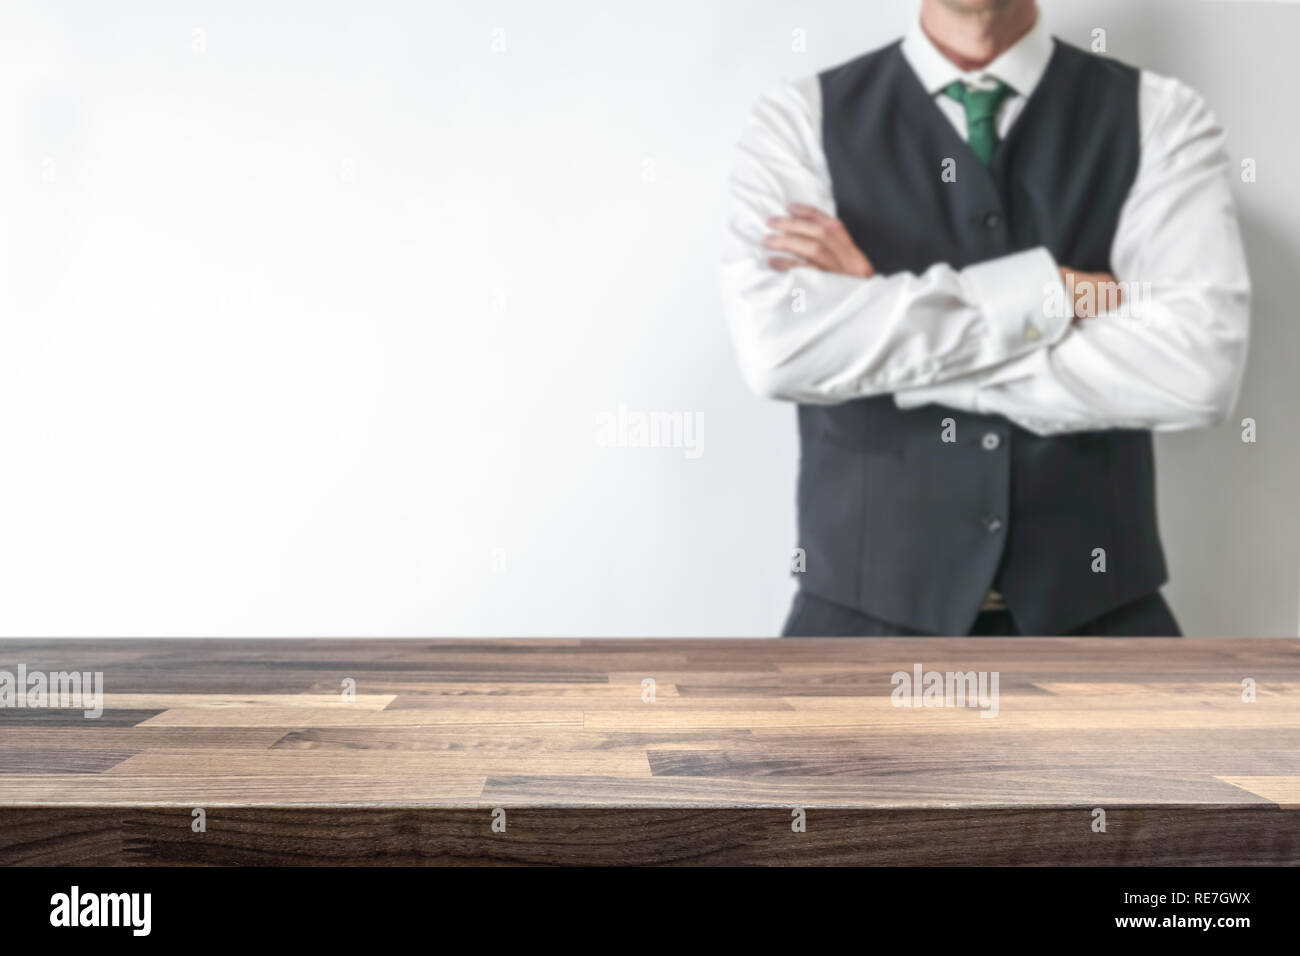 Empty table top for product display montage. Office work space concept. Big boss businessman blurred in the background. Stock Photo